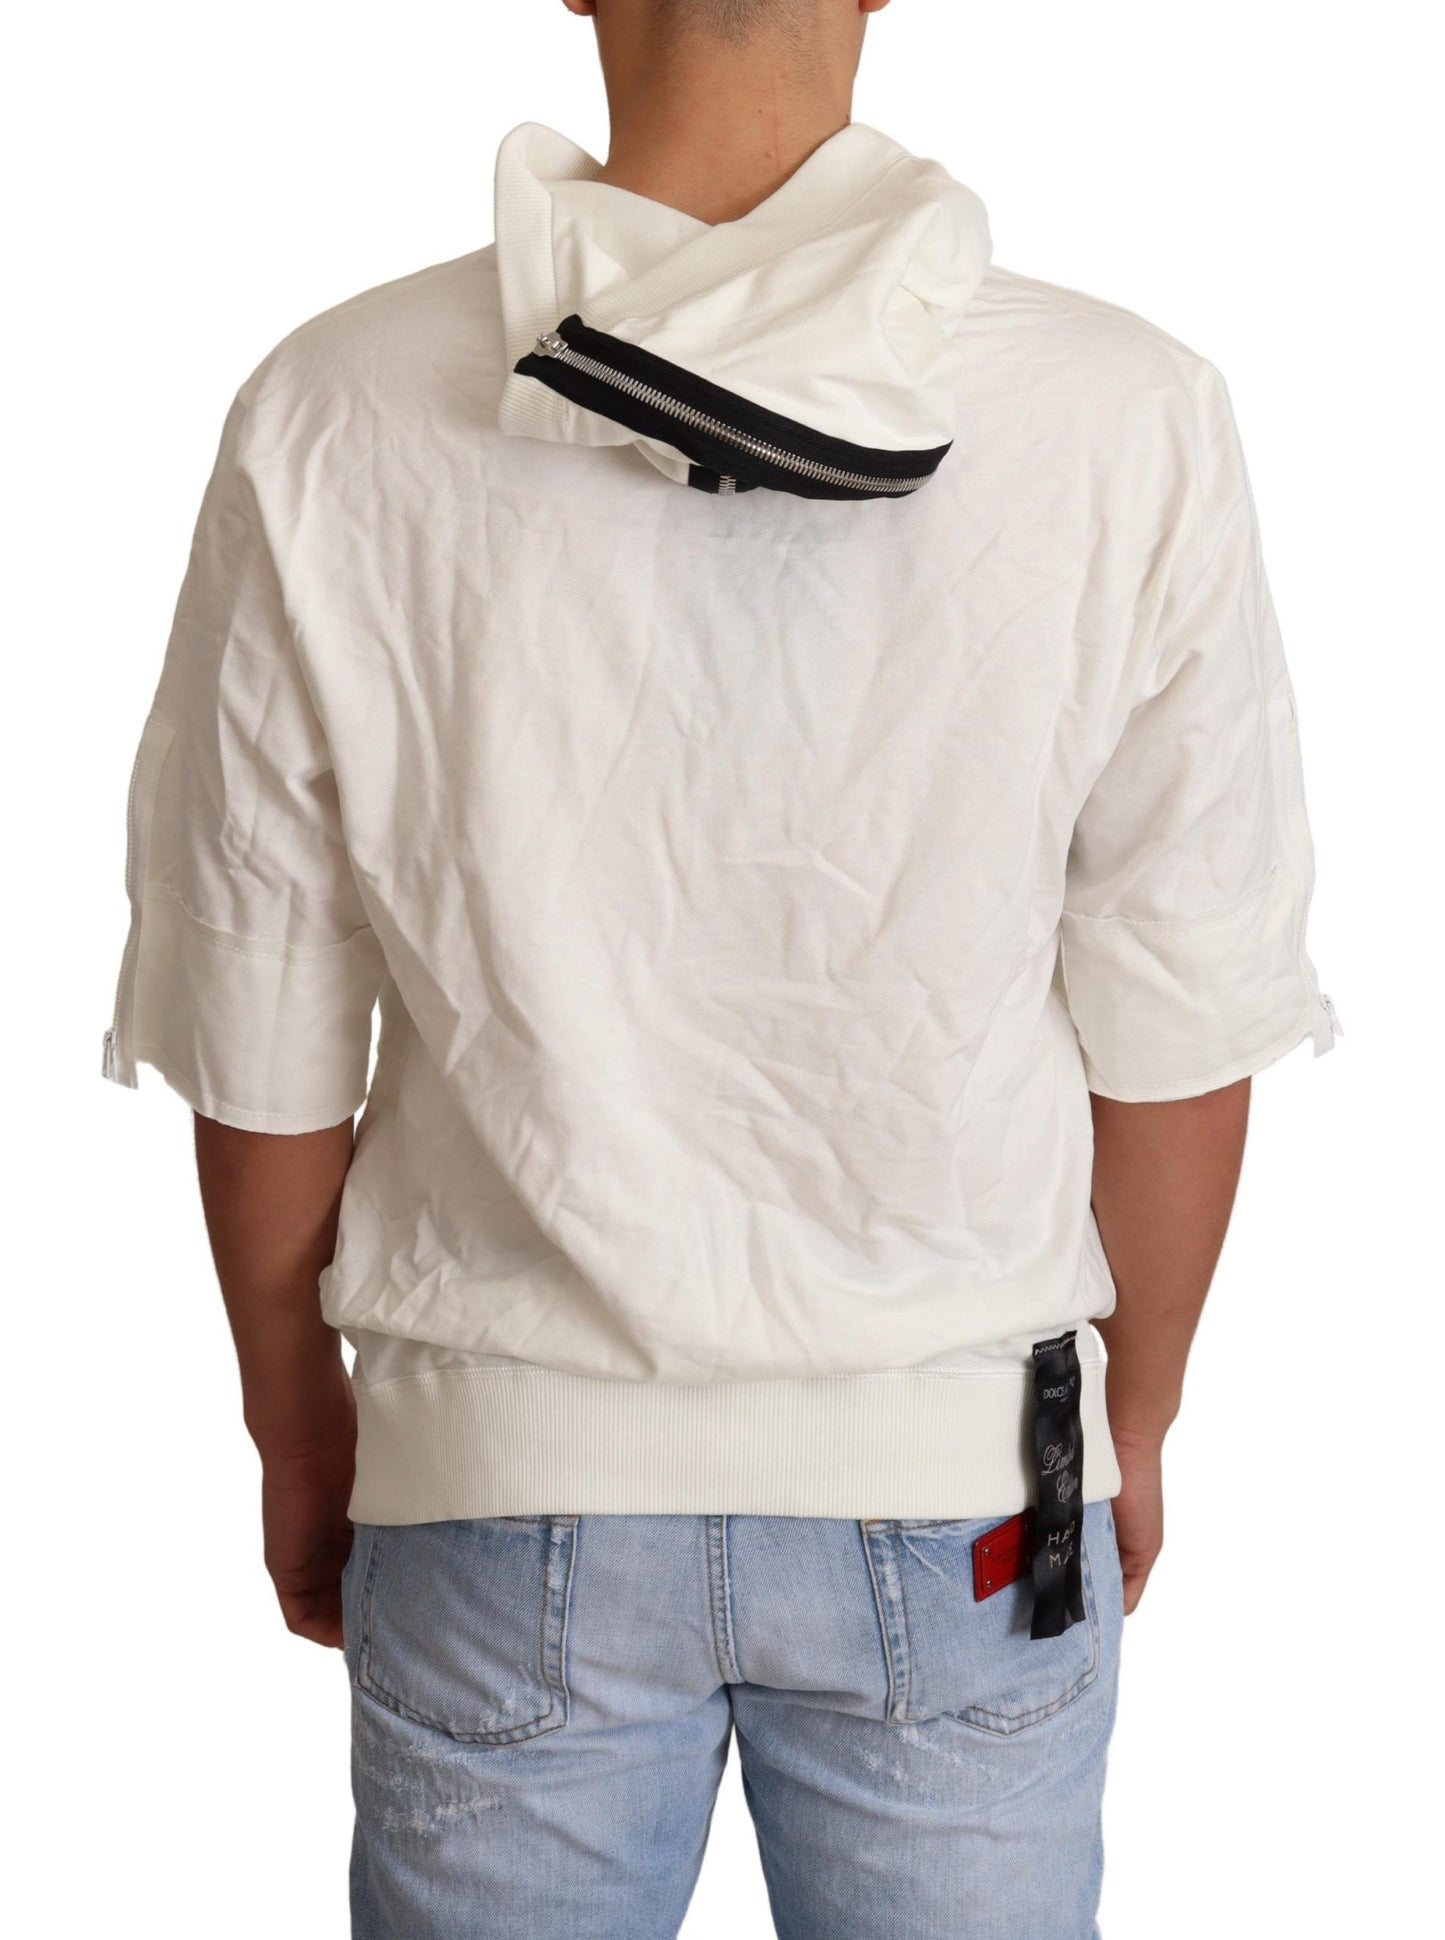 Exquisite Off-White Cotton Hooded Sweater